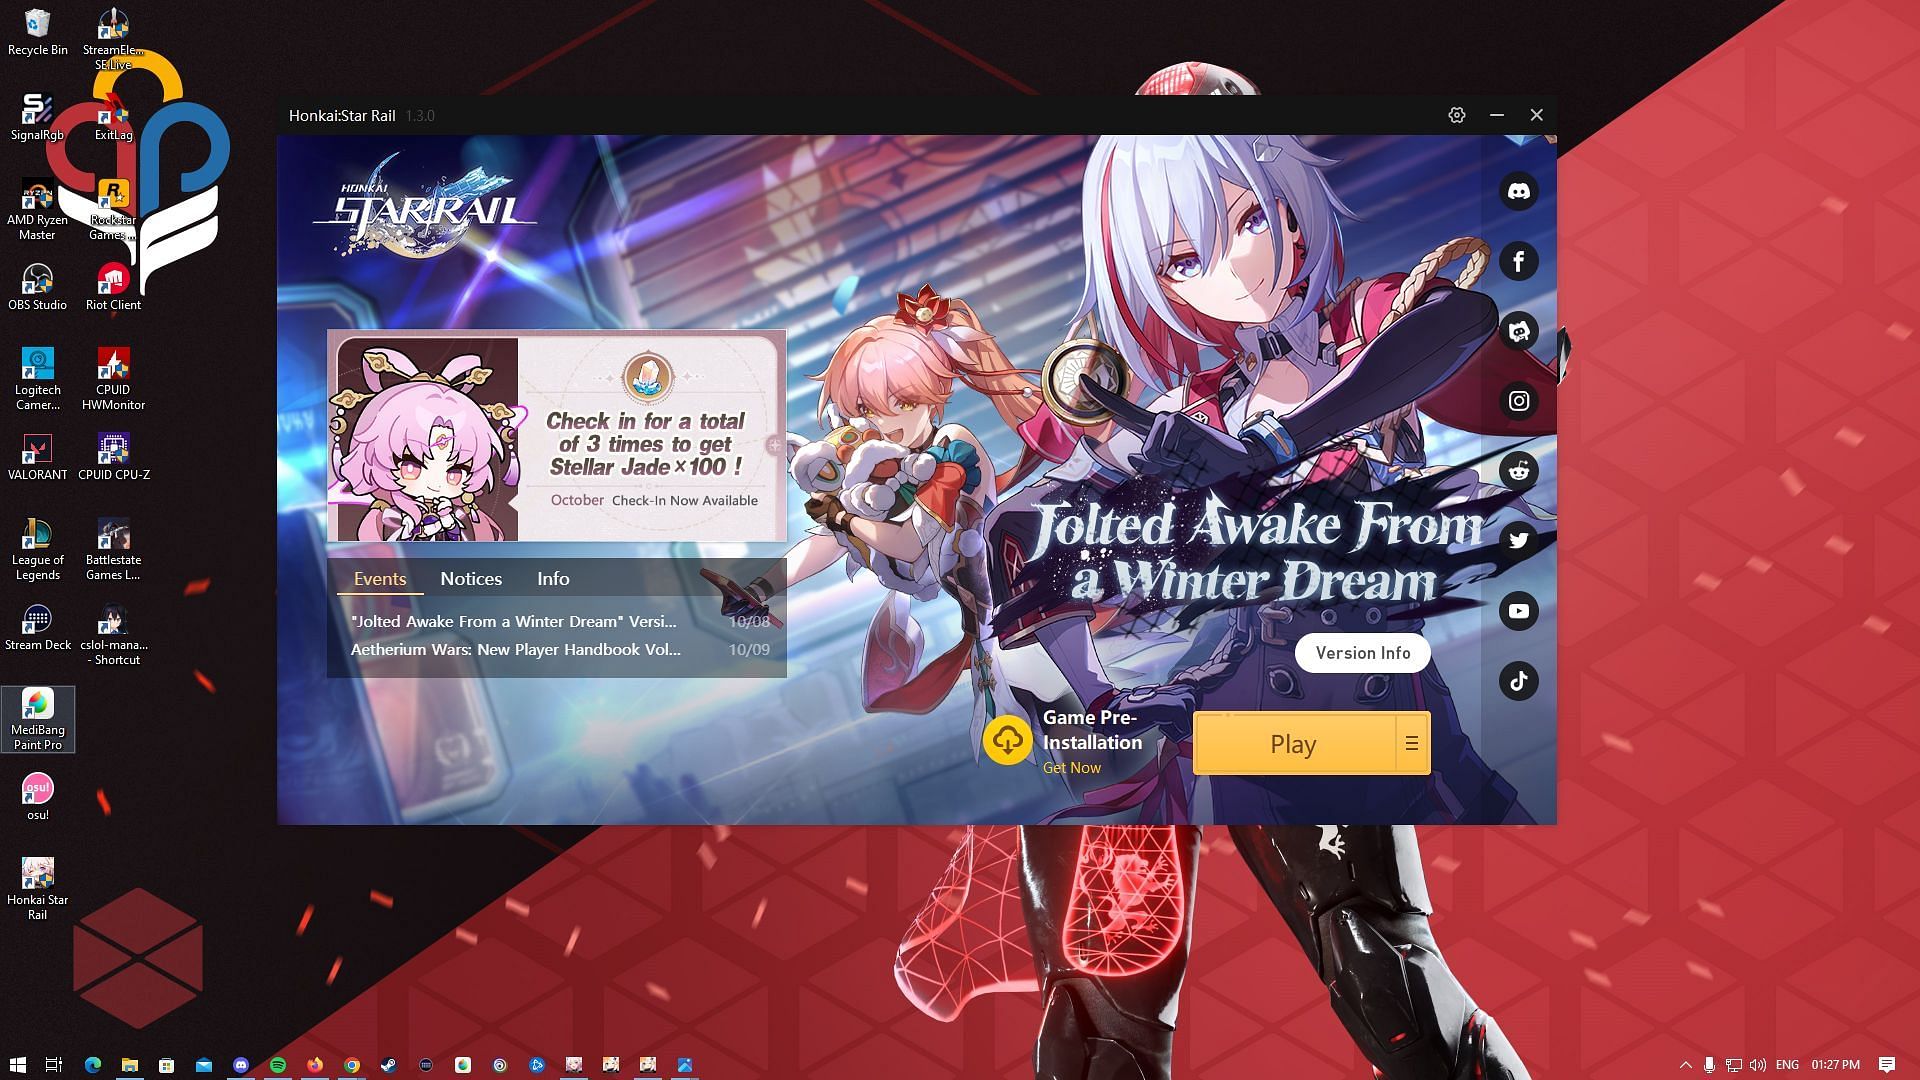 How to download Honkai Star Rail on PC